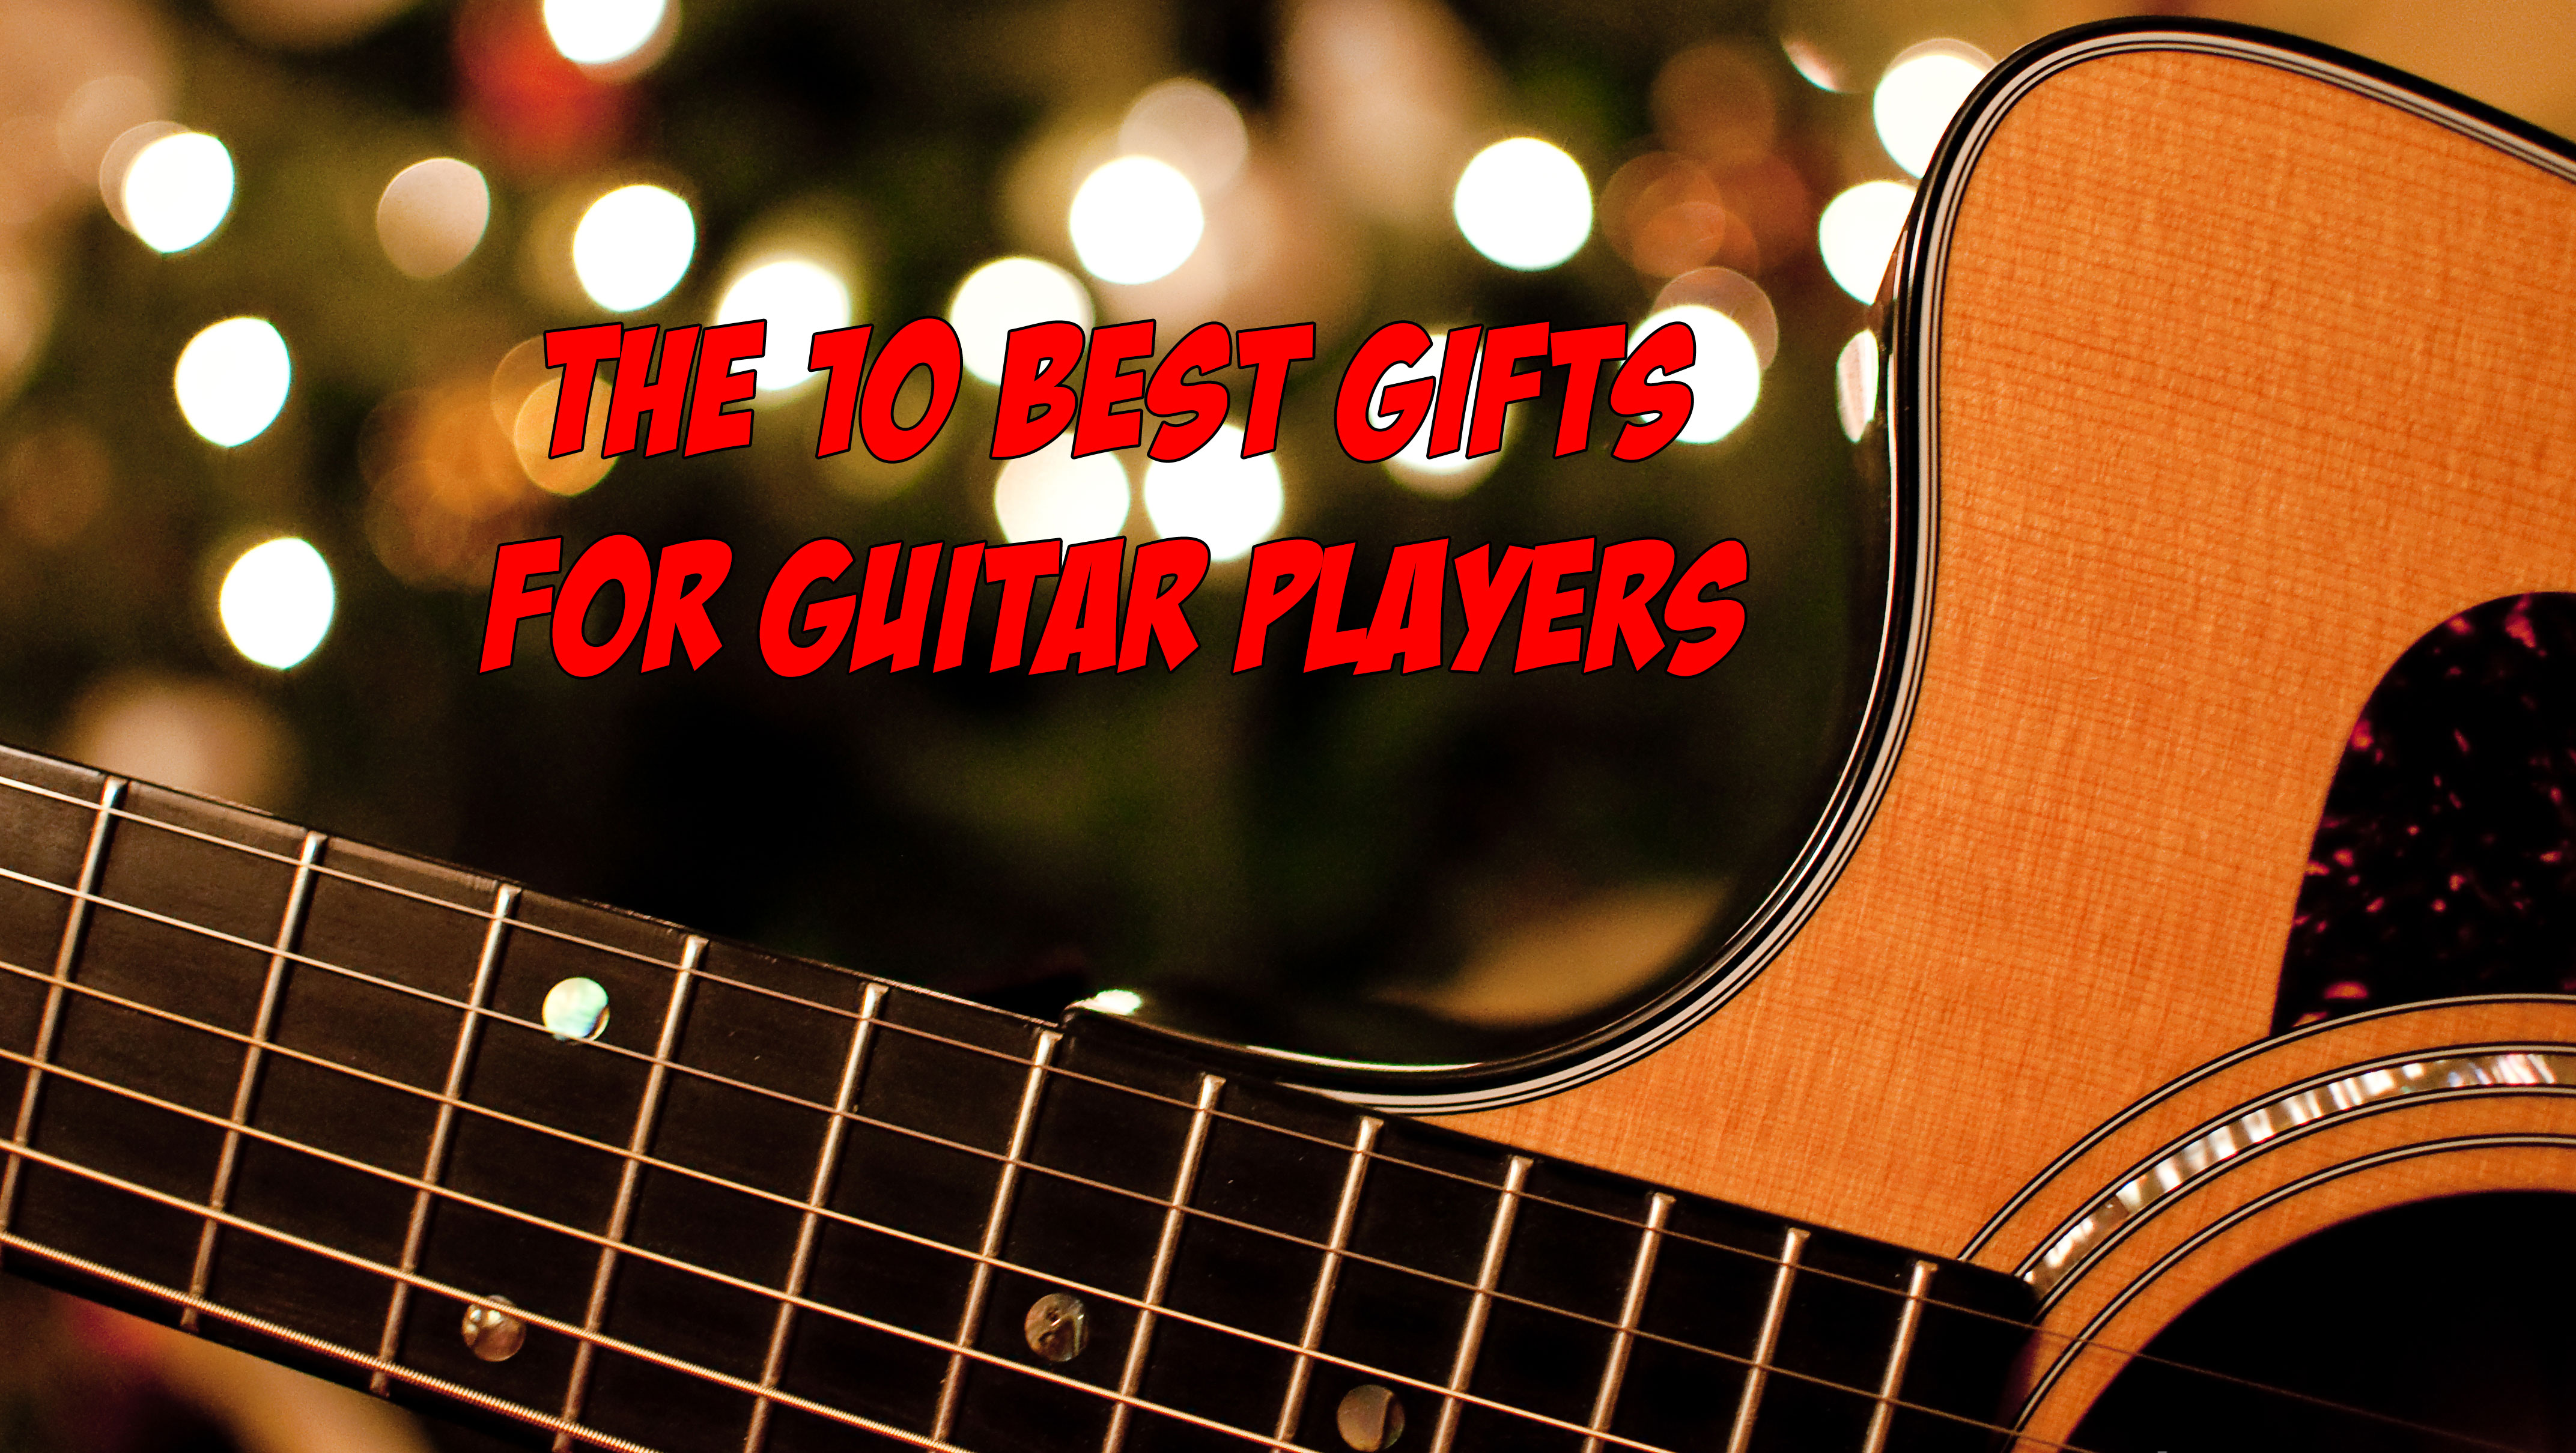 Gifts for Guitar Players